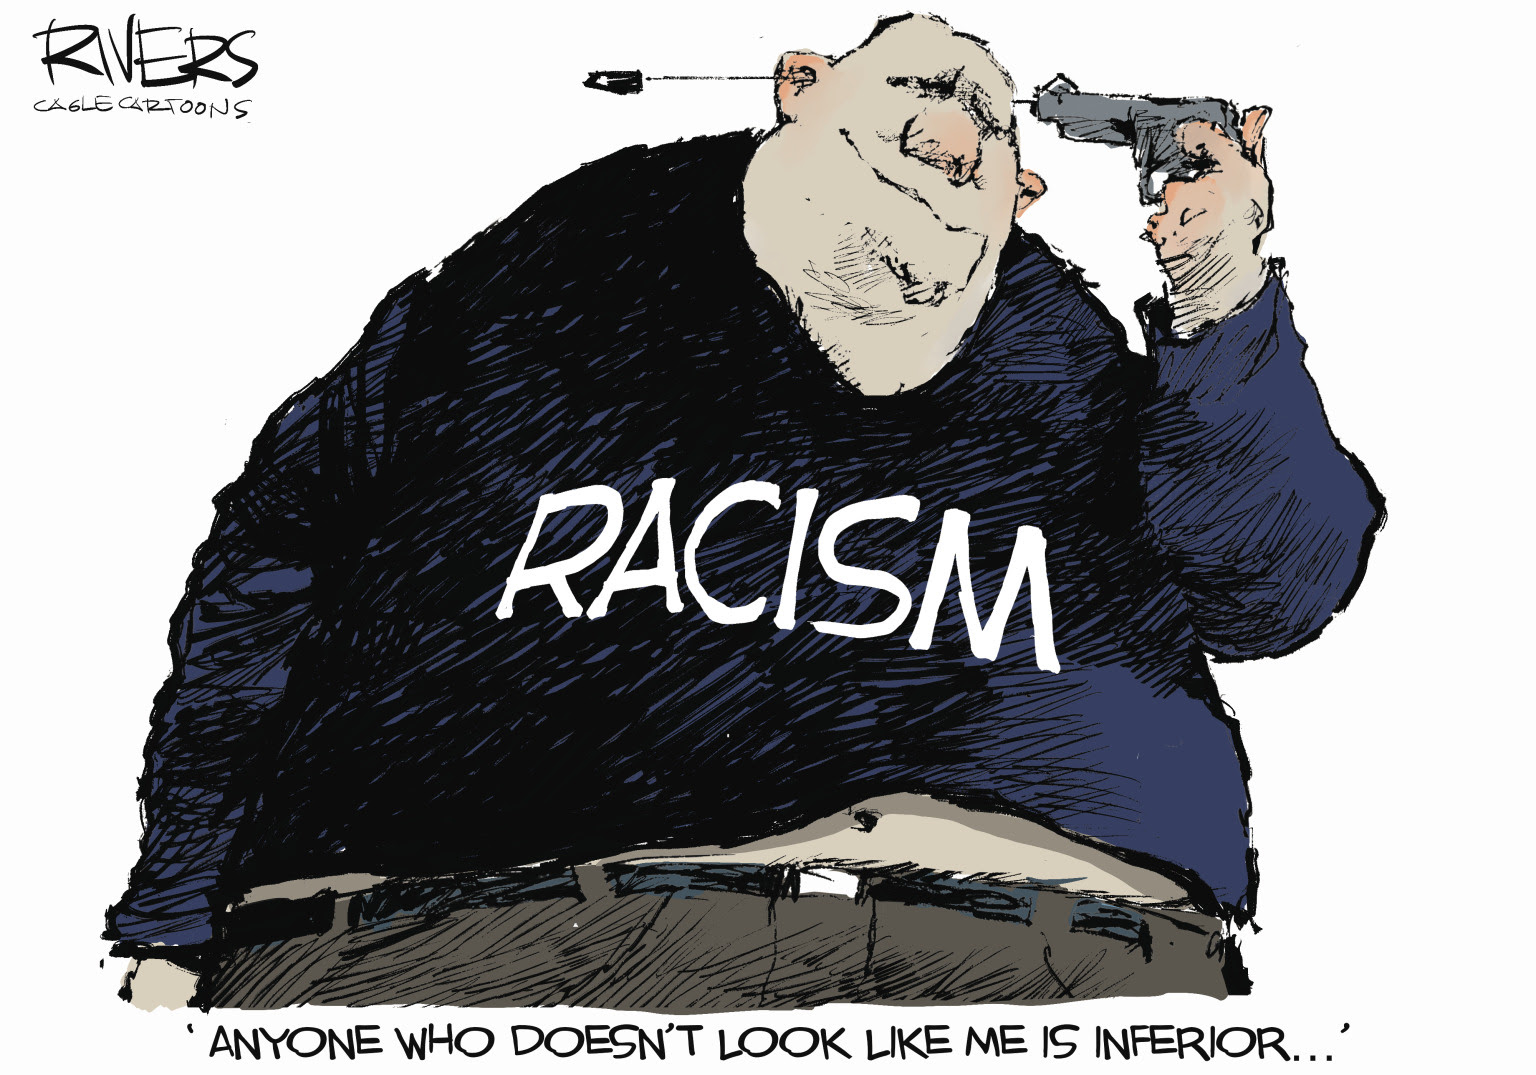 GOP and FOX push racism and violence while not doing anything for gun control